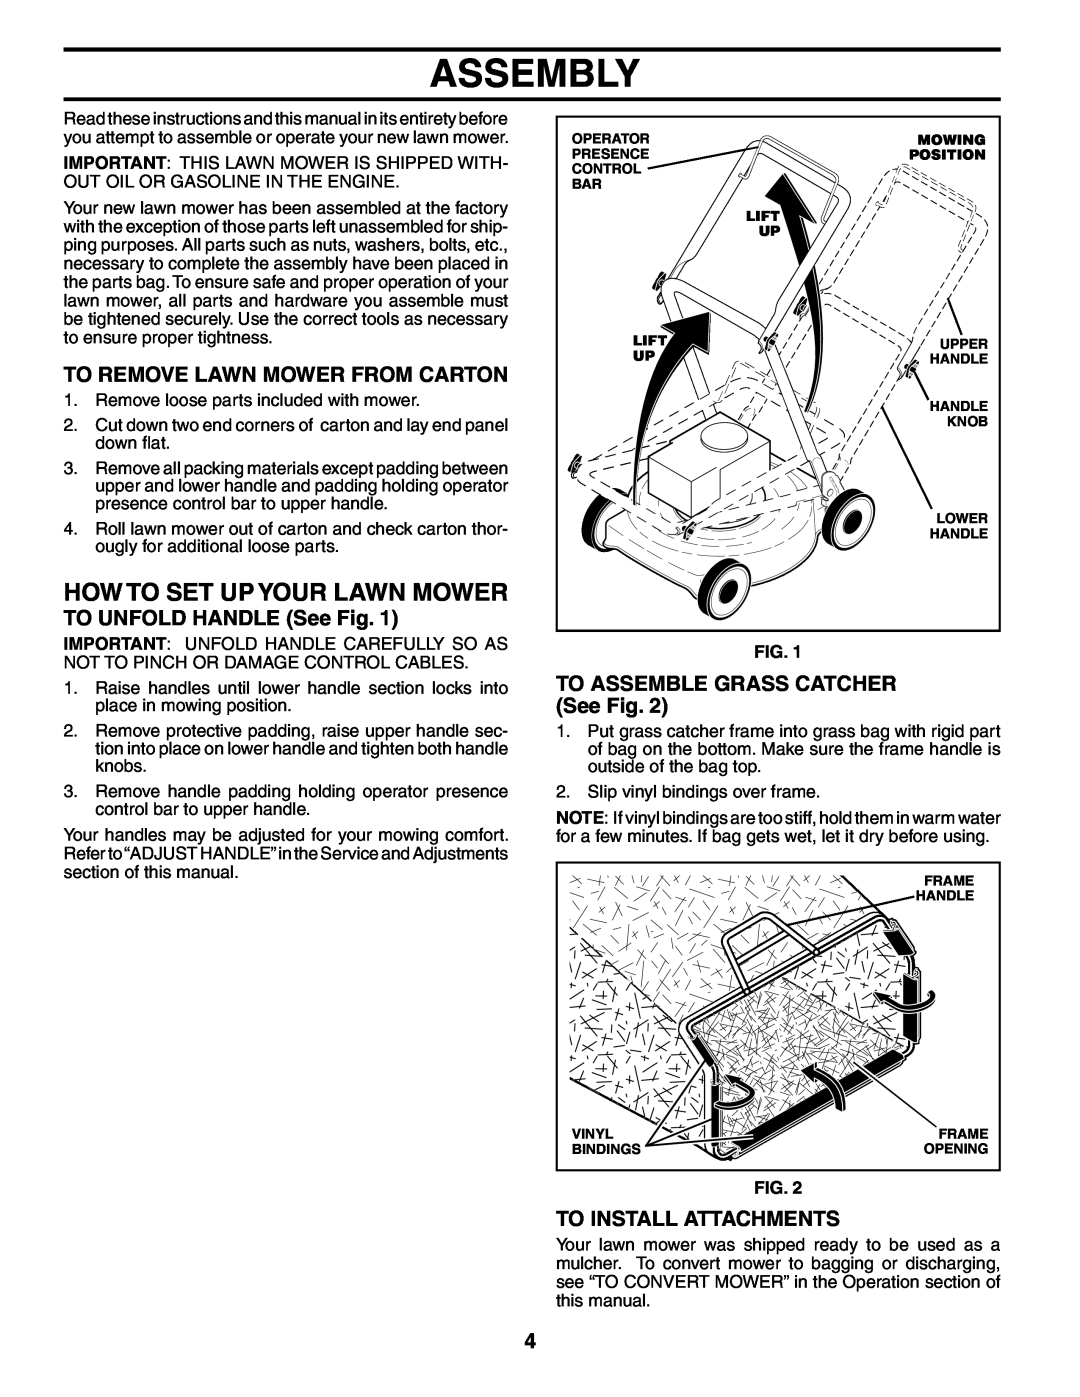 Husqvarna 7021CH1 Assembly, How To Set Up Your Lawn Mower, To Remove Lawn Mower From Carton, TO UNFOLD HANDLE See Fig 